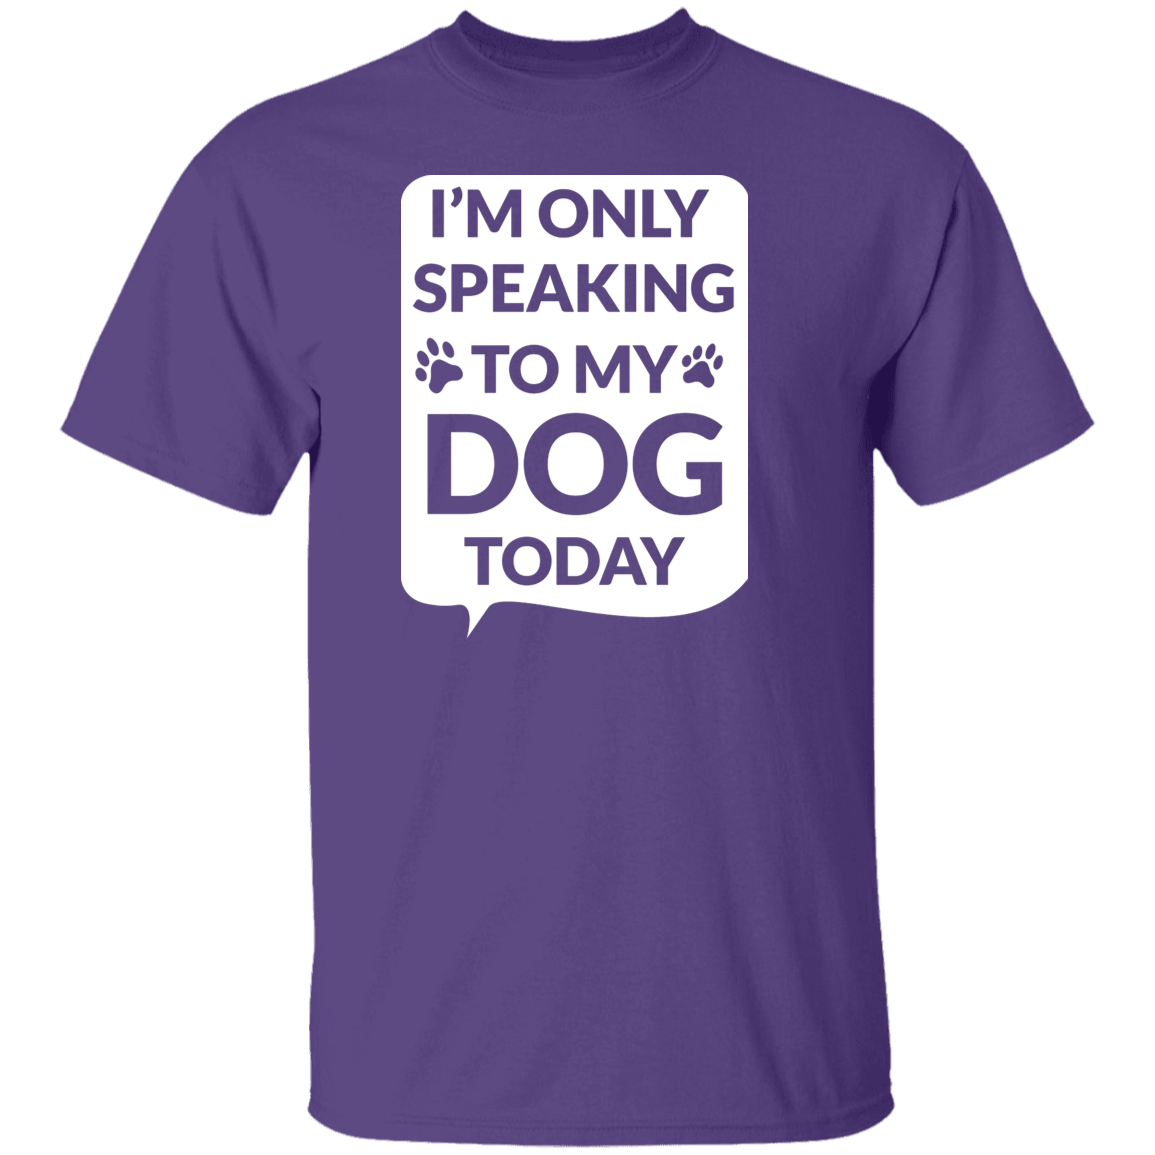 I'm Only Speaking To My Dog Today - T Shirt.